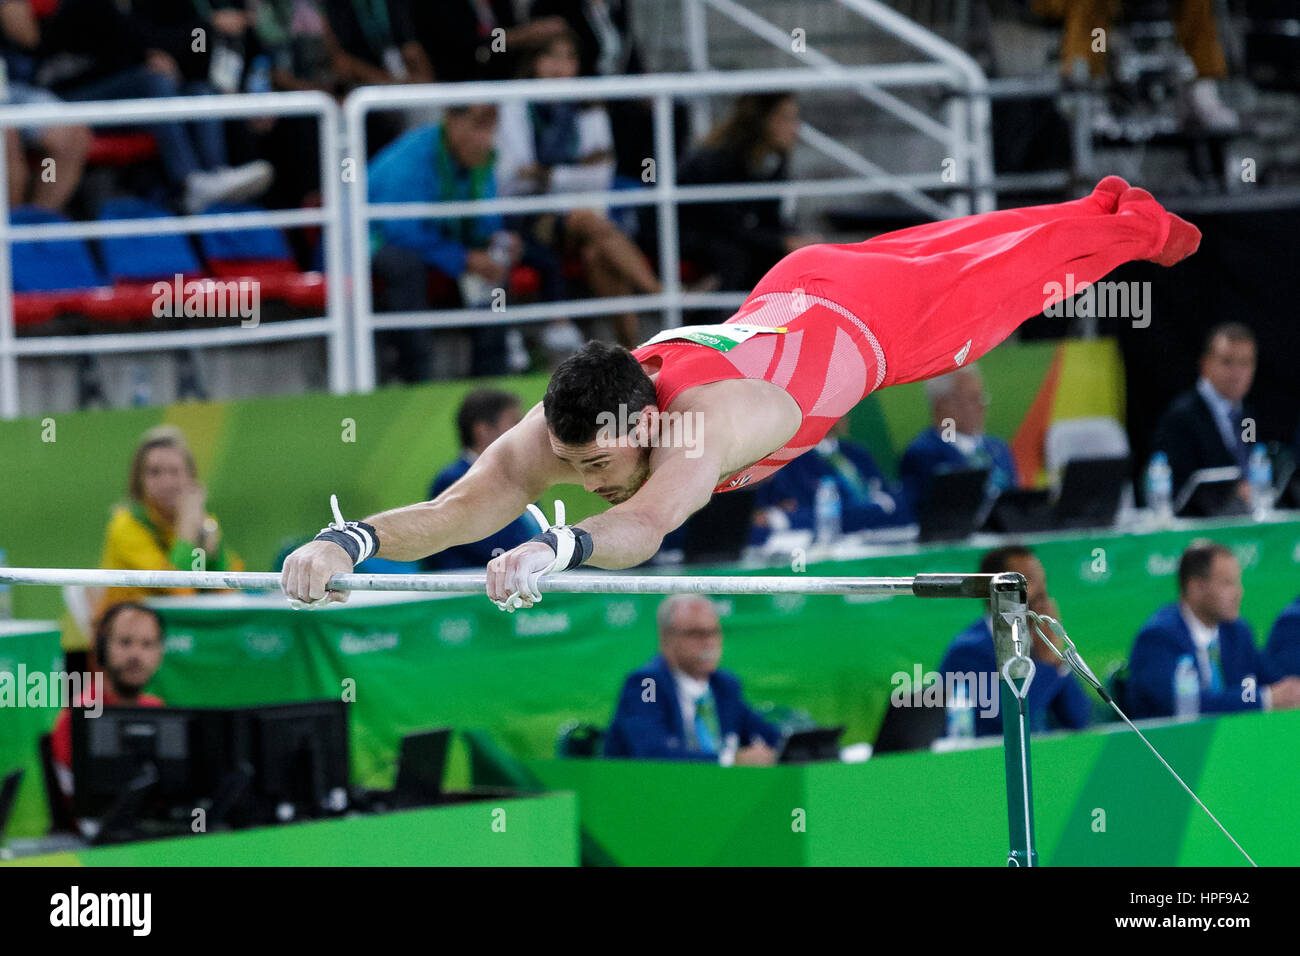 Rio de Janeiro, Brazil. 08 August 2016 Kristian Thomas (GBR) performs on the Horizontal Bar during Men's artistic team final at the 2016 Olympic Summe Stock Photo